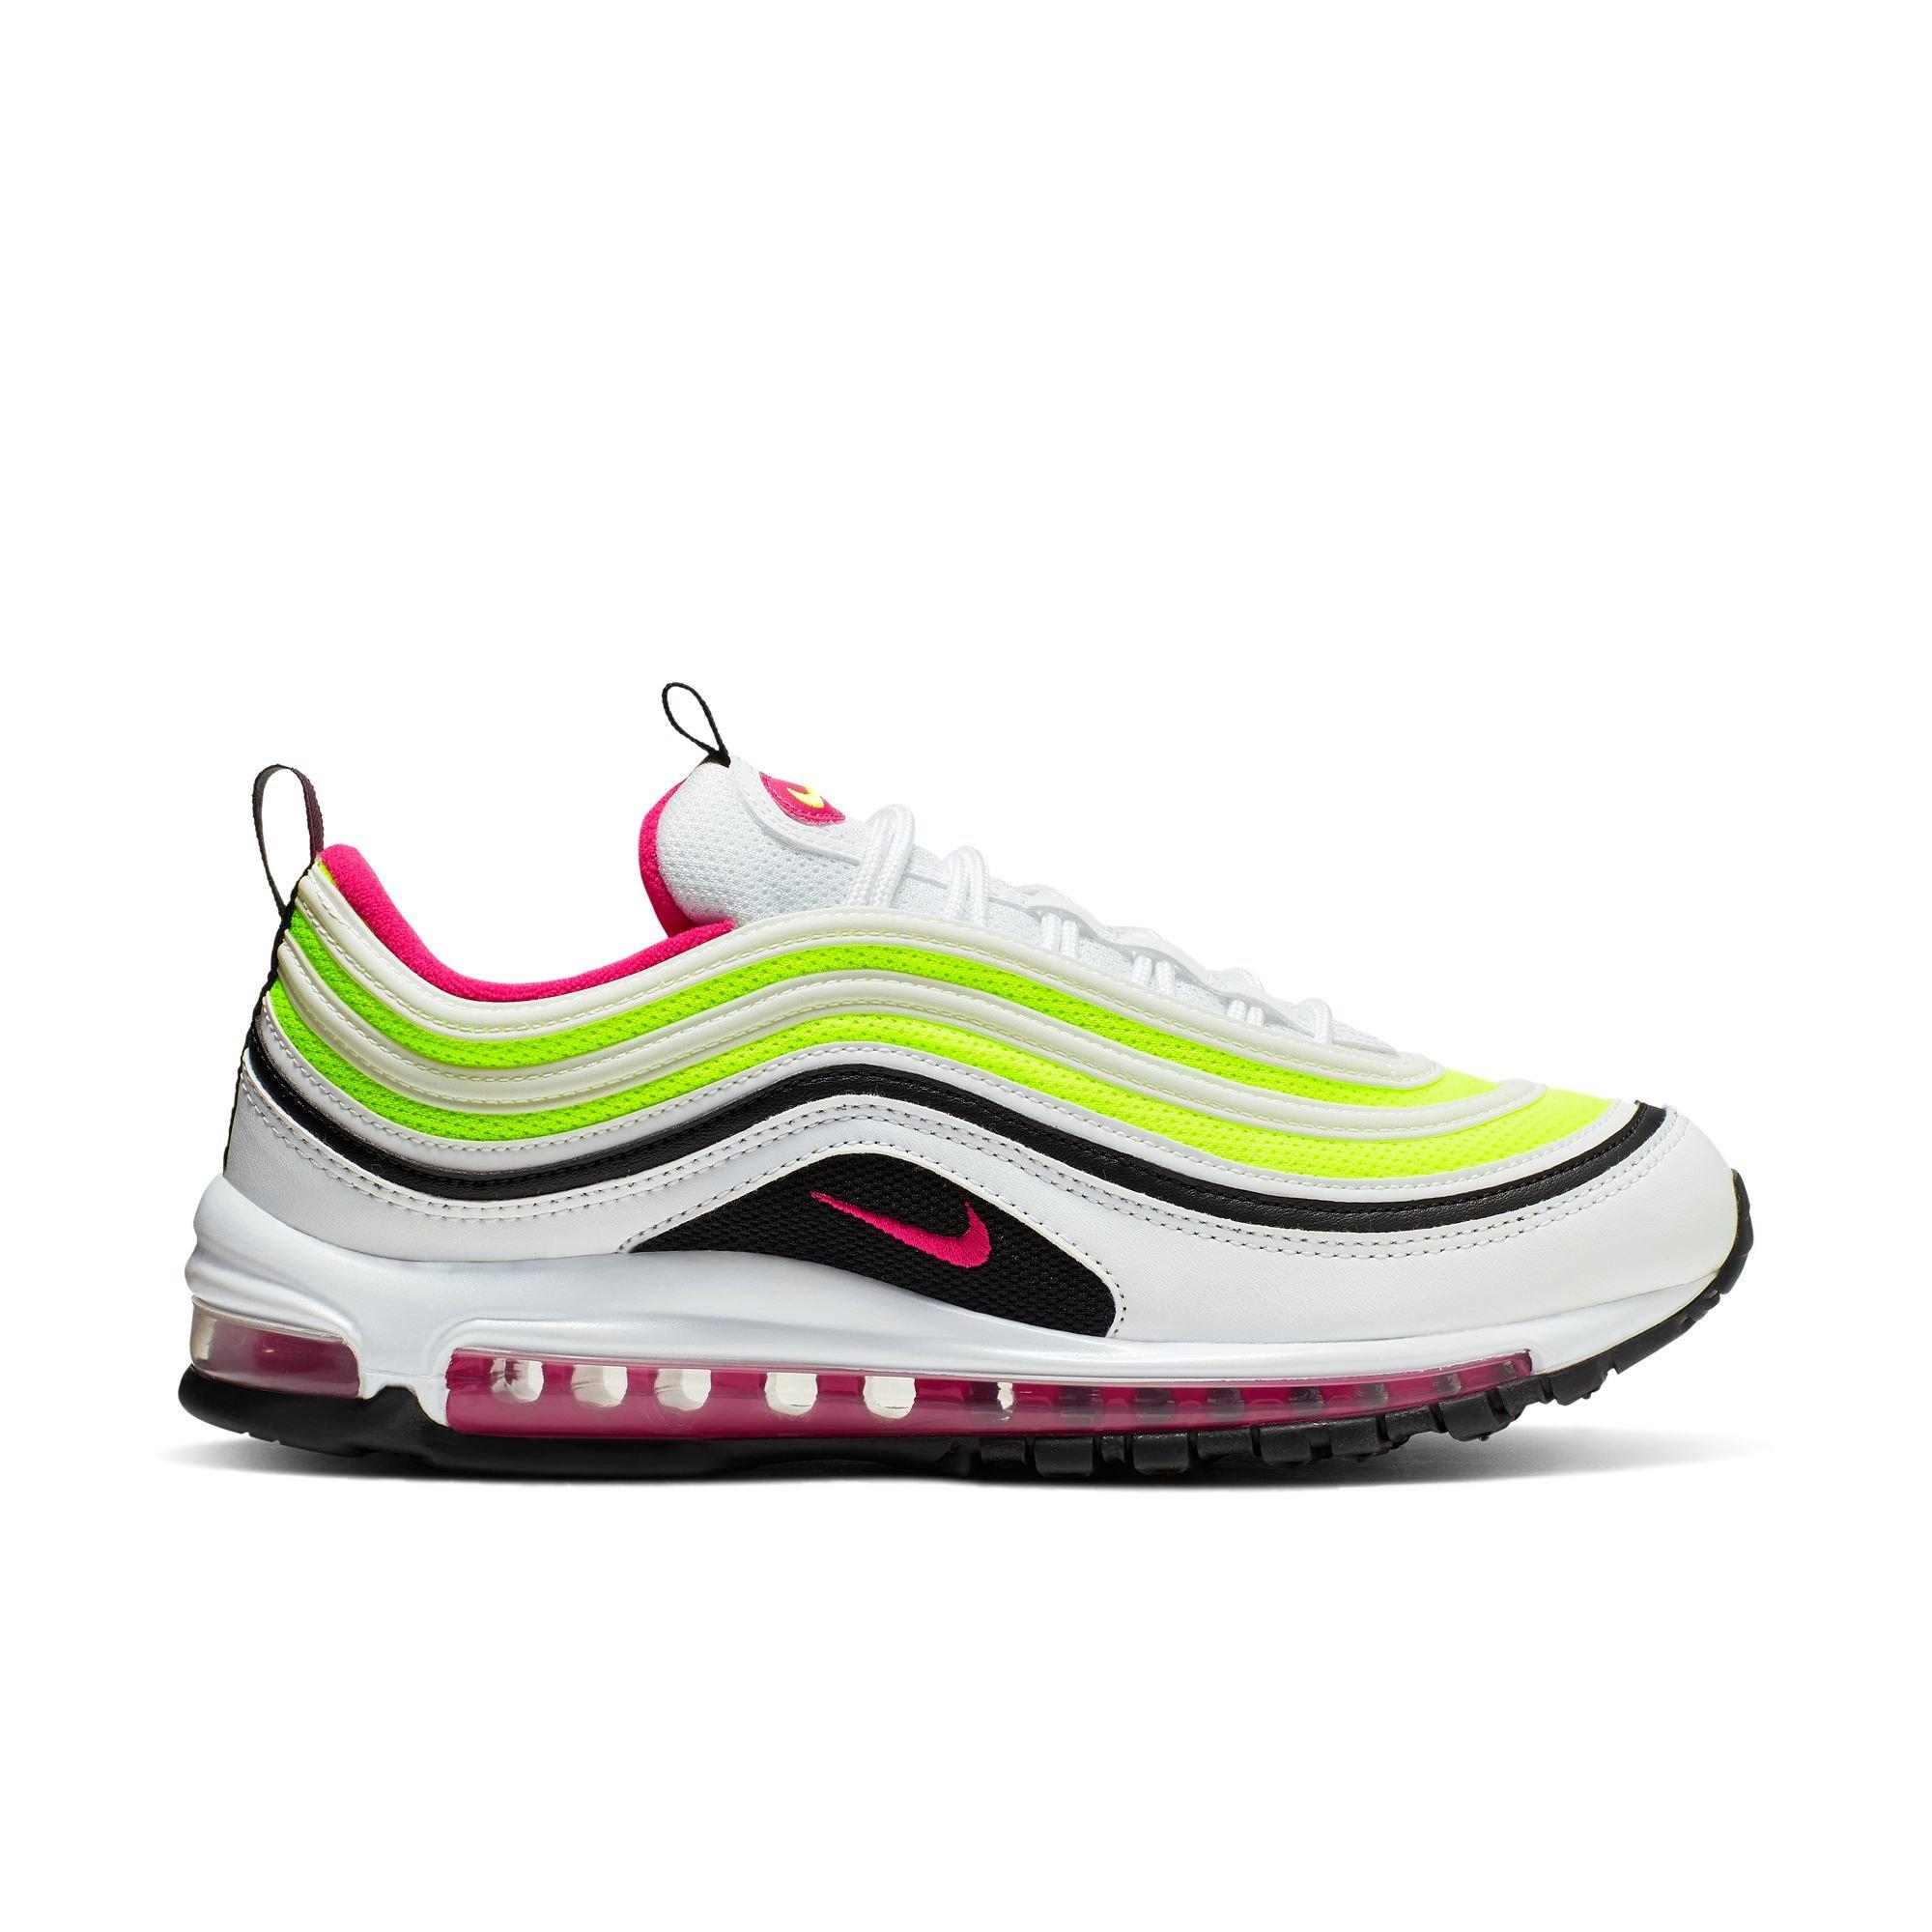 air max 97 lime green pink